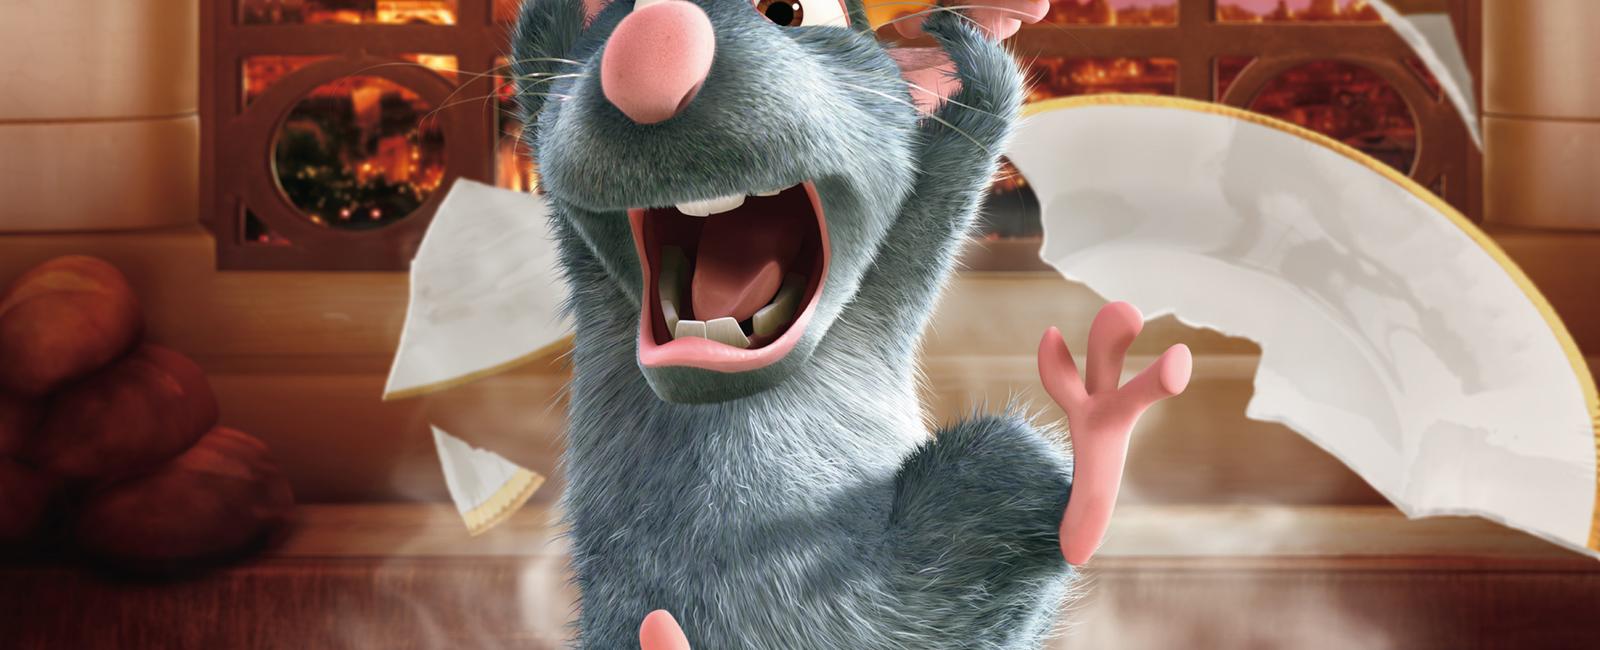 After the release of the animated film ratatouille pet rat sales jumped by 50